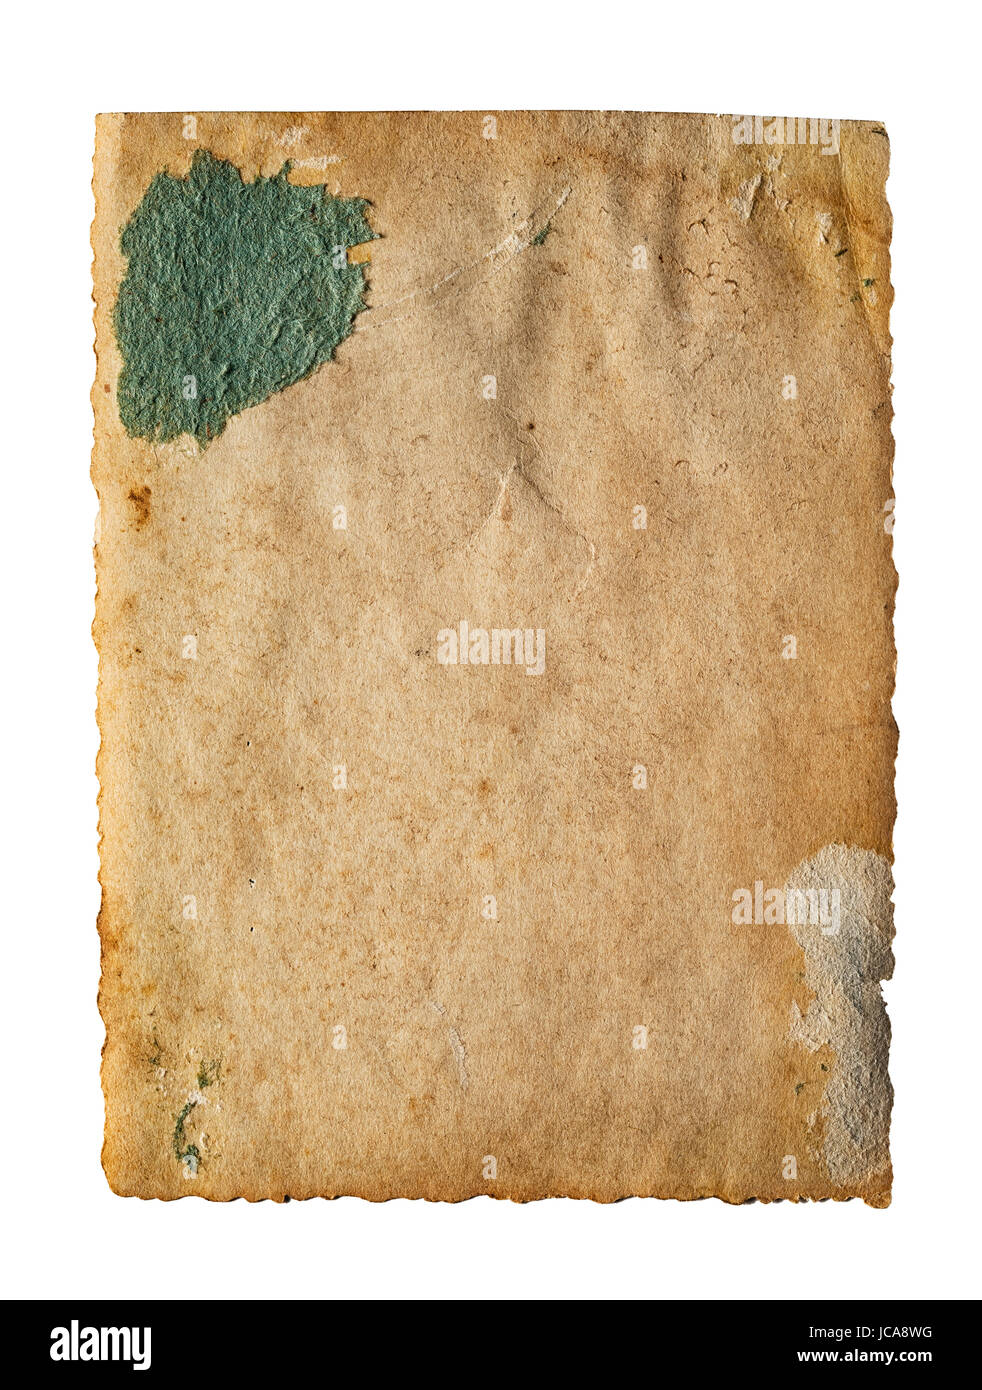 Old aged paper with ragged edges isolated on white Stock Photo